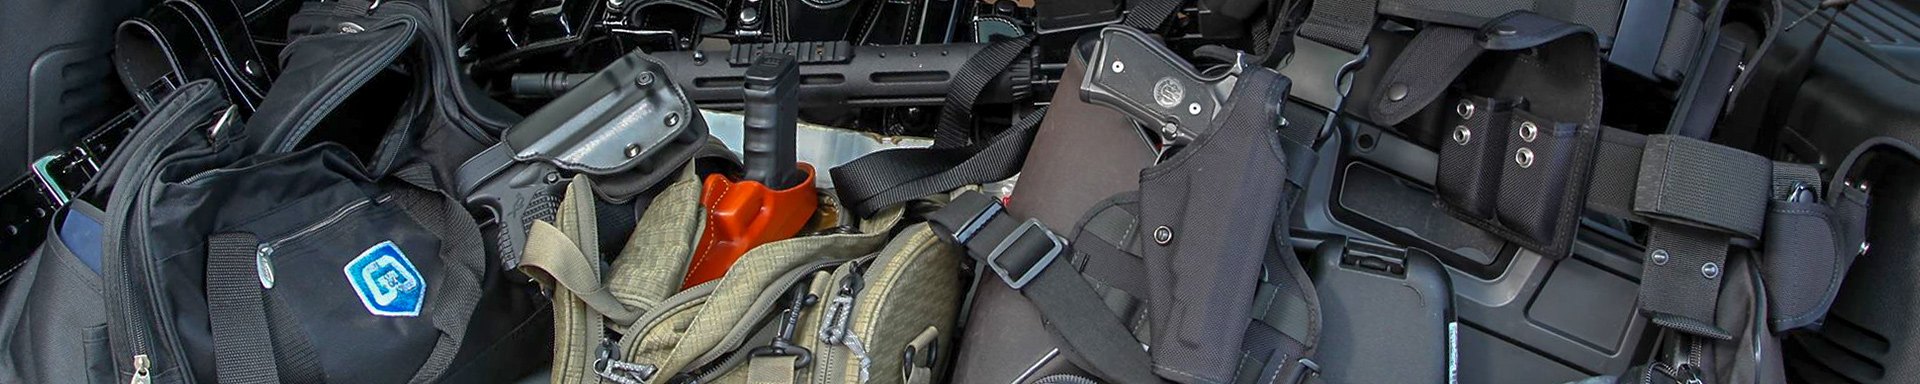 Gould & Goodrich Tactical Pouches & Organizers